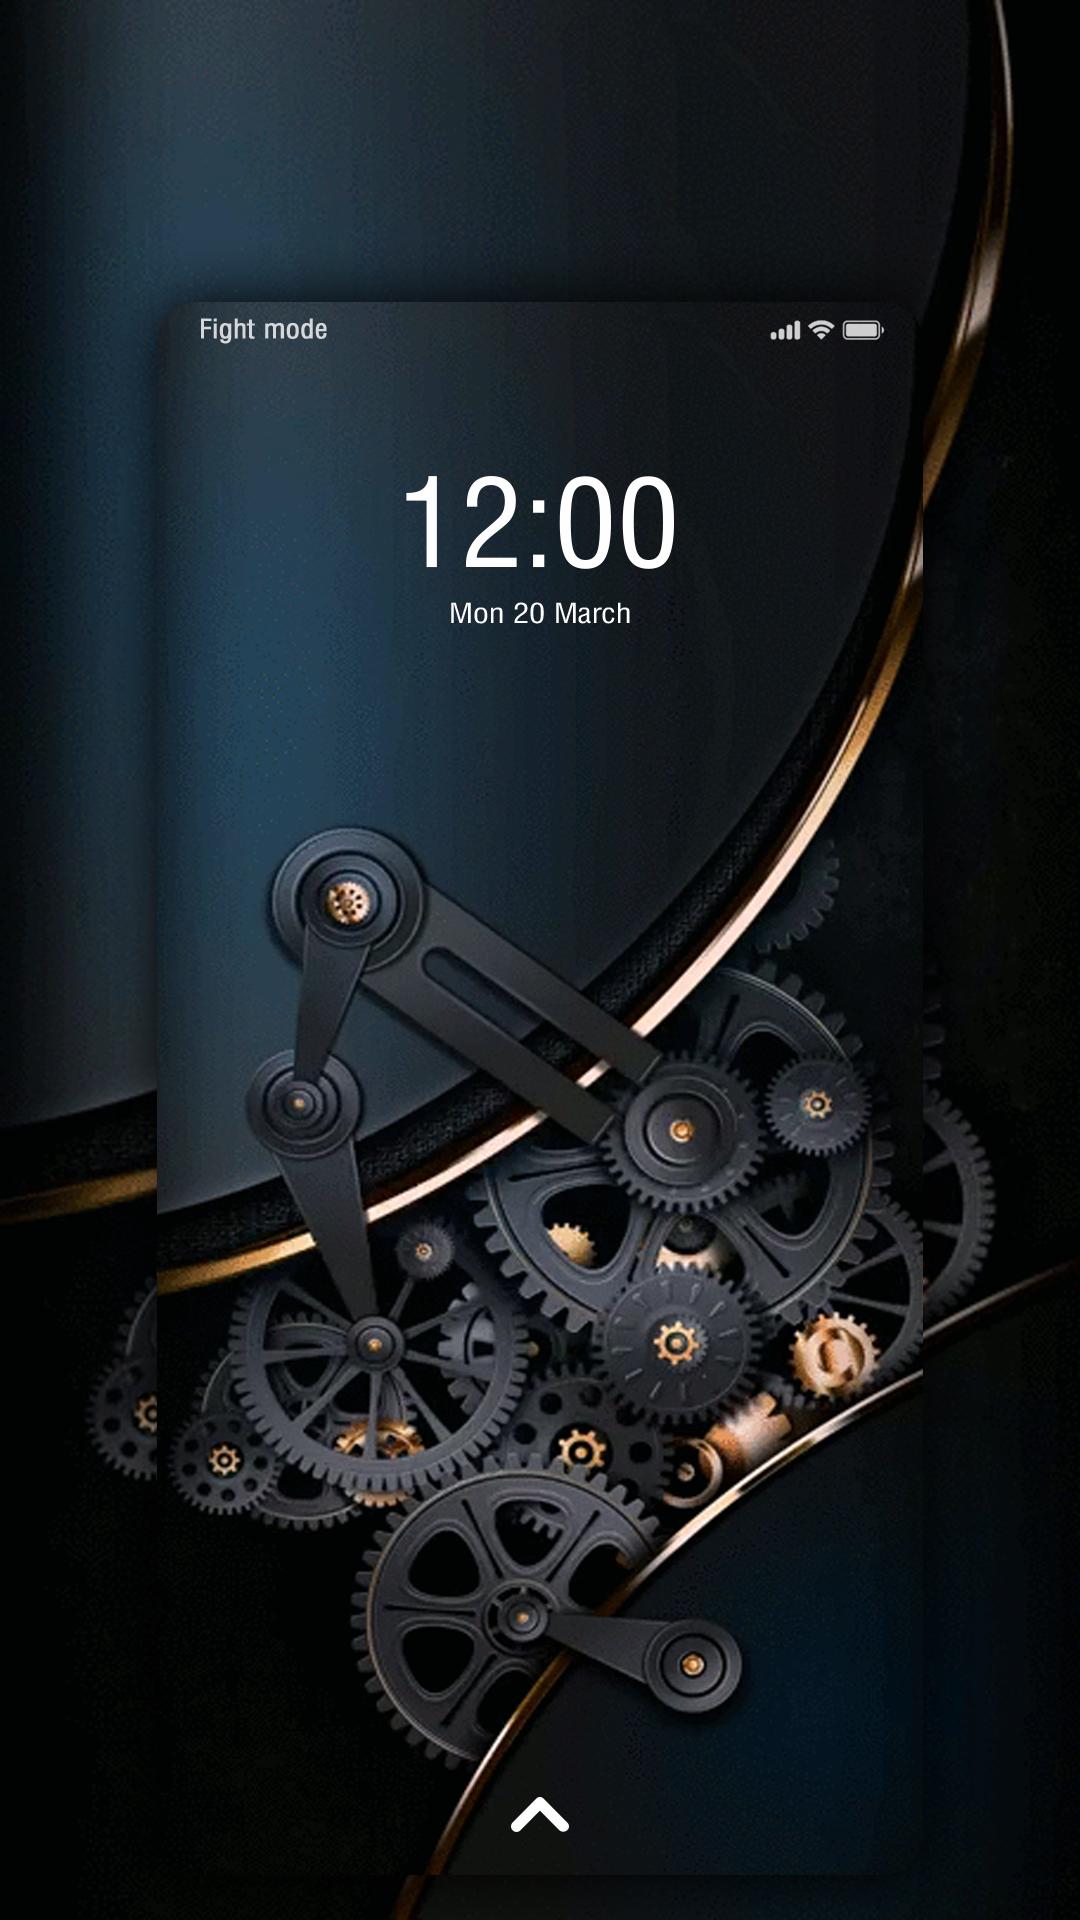 Free Download Mechanical Gear Live Wallpaper For Android Apk Download 1080x19 For Your Desktop Mobile Tablet Explore 19 Mechanical Wallpaper Mechanical Background Wallpaper Mechanical Desktop Wallpaper Mechanical Wallpaper Hd